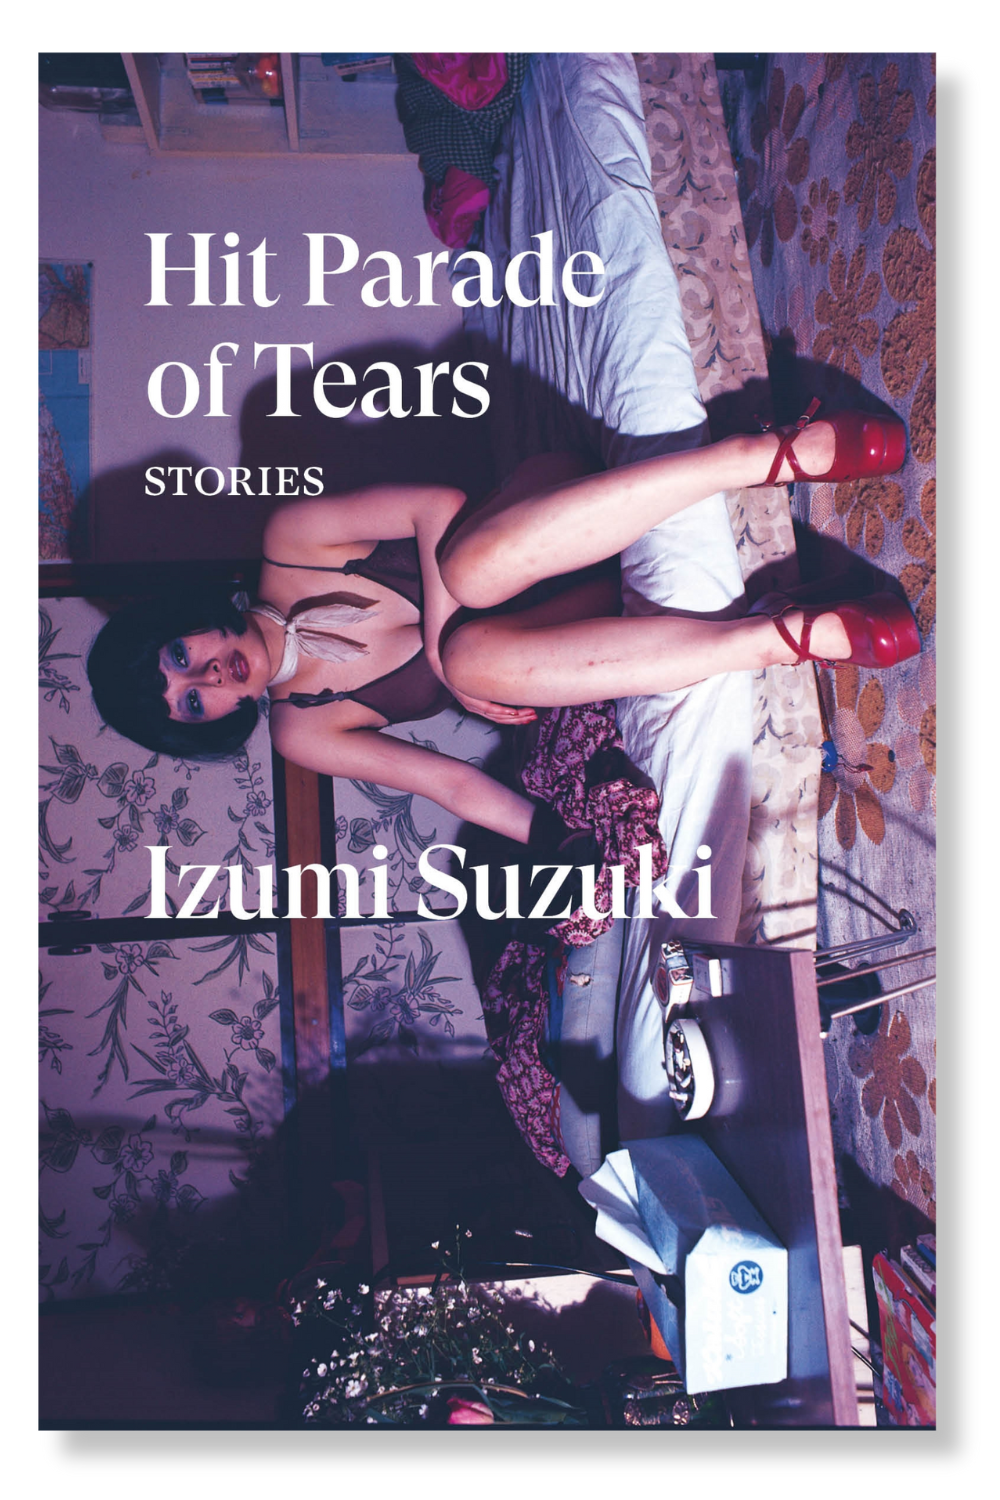 The cover of "Hit Parade of Tears"